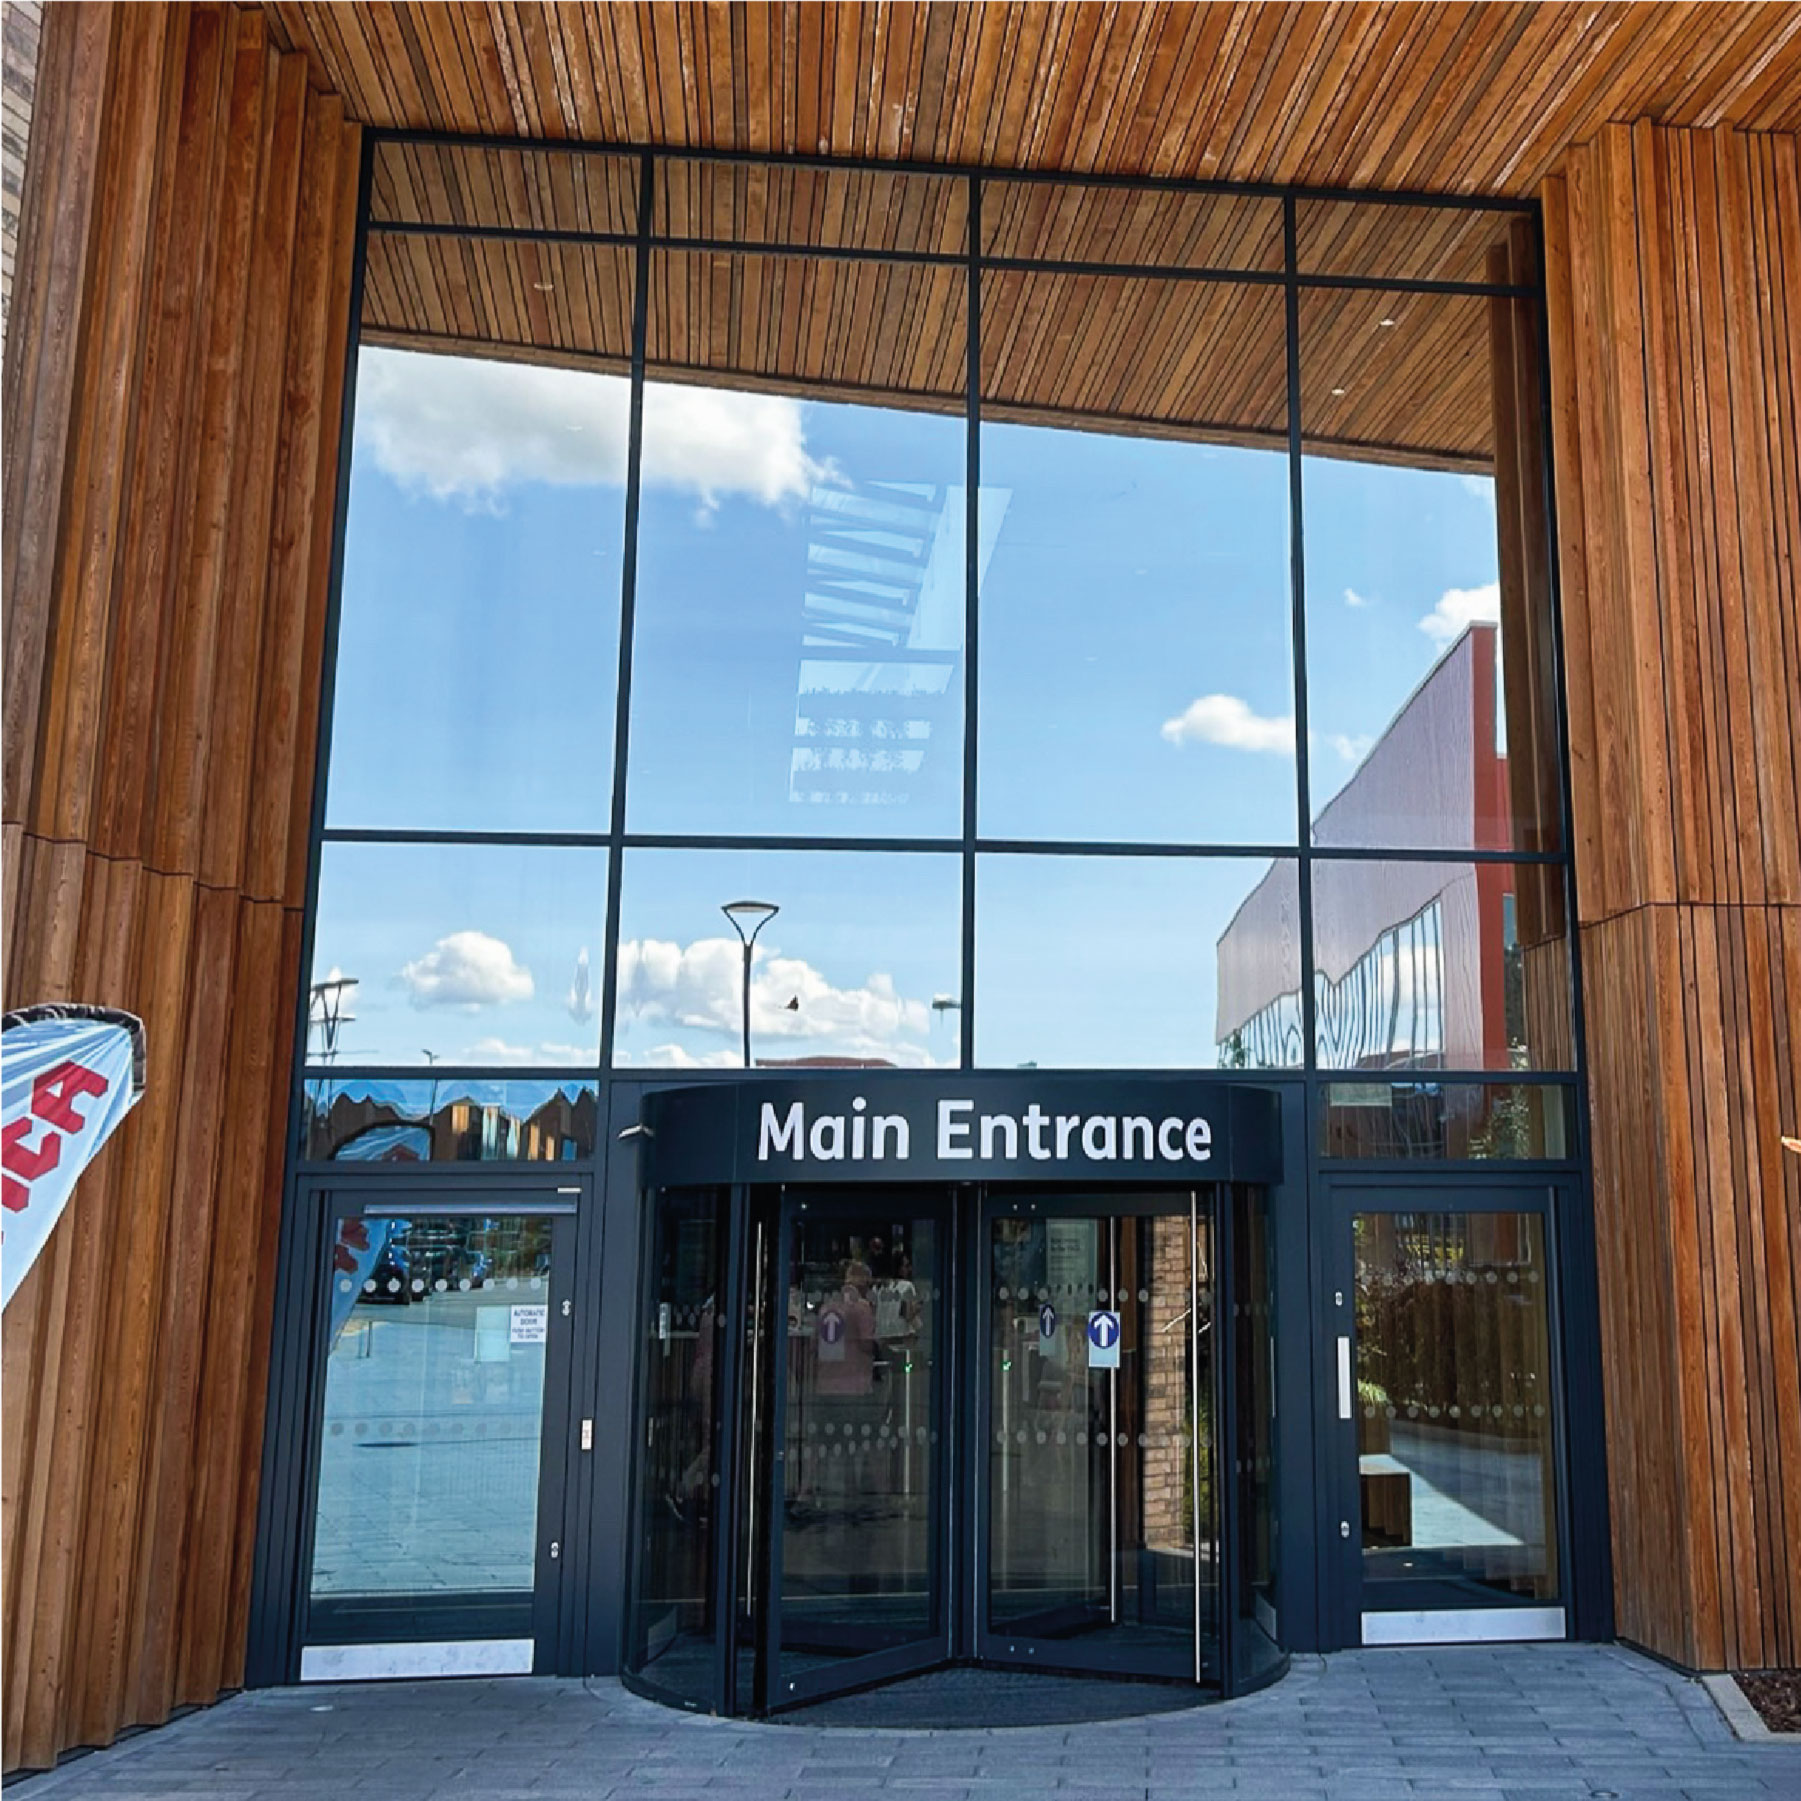 YMCA Main Entrance with a reflective film on the large windows above the door.